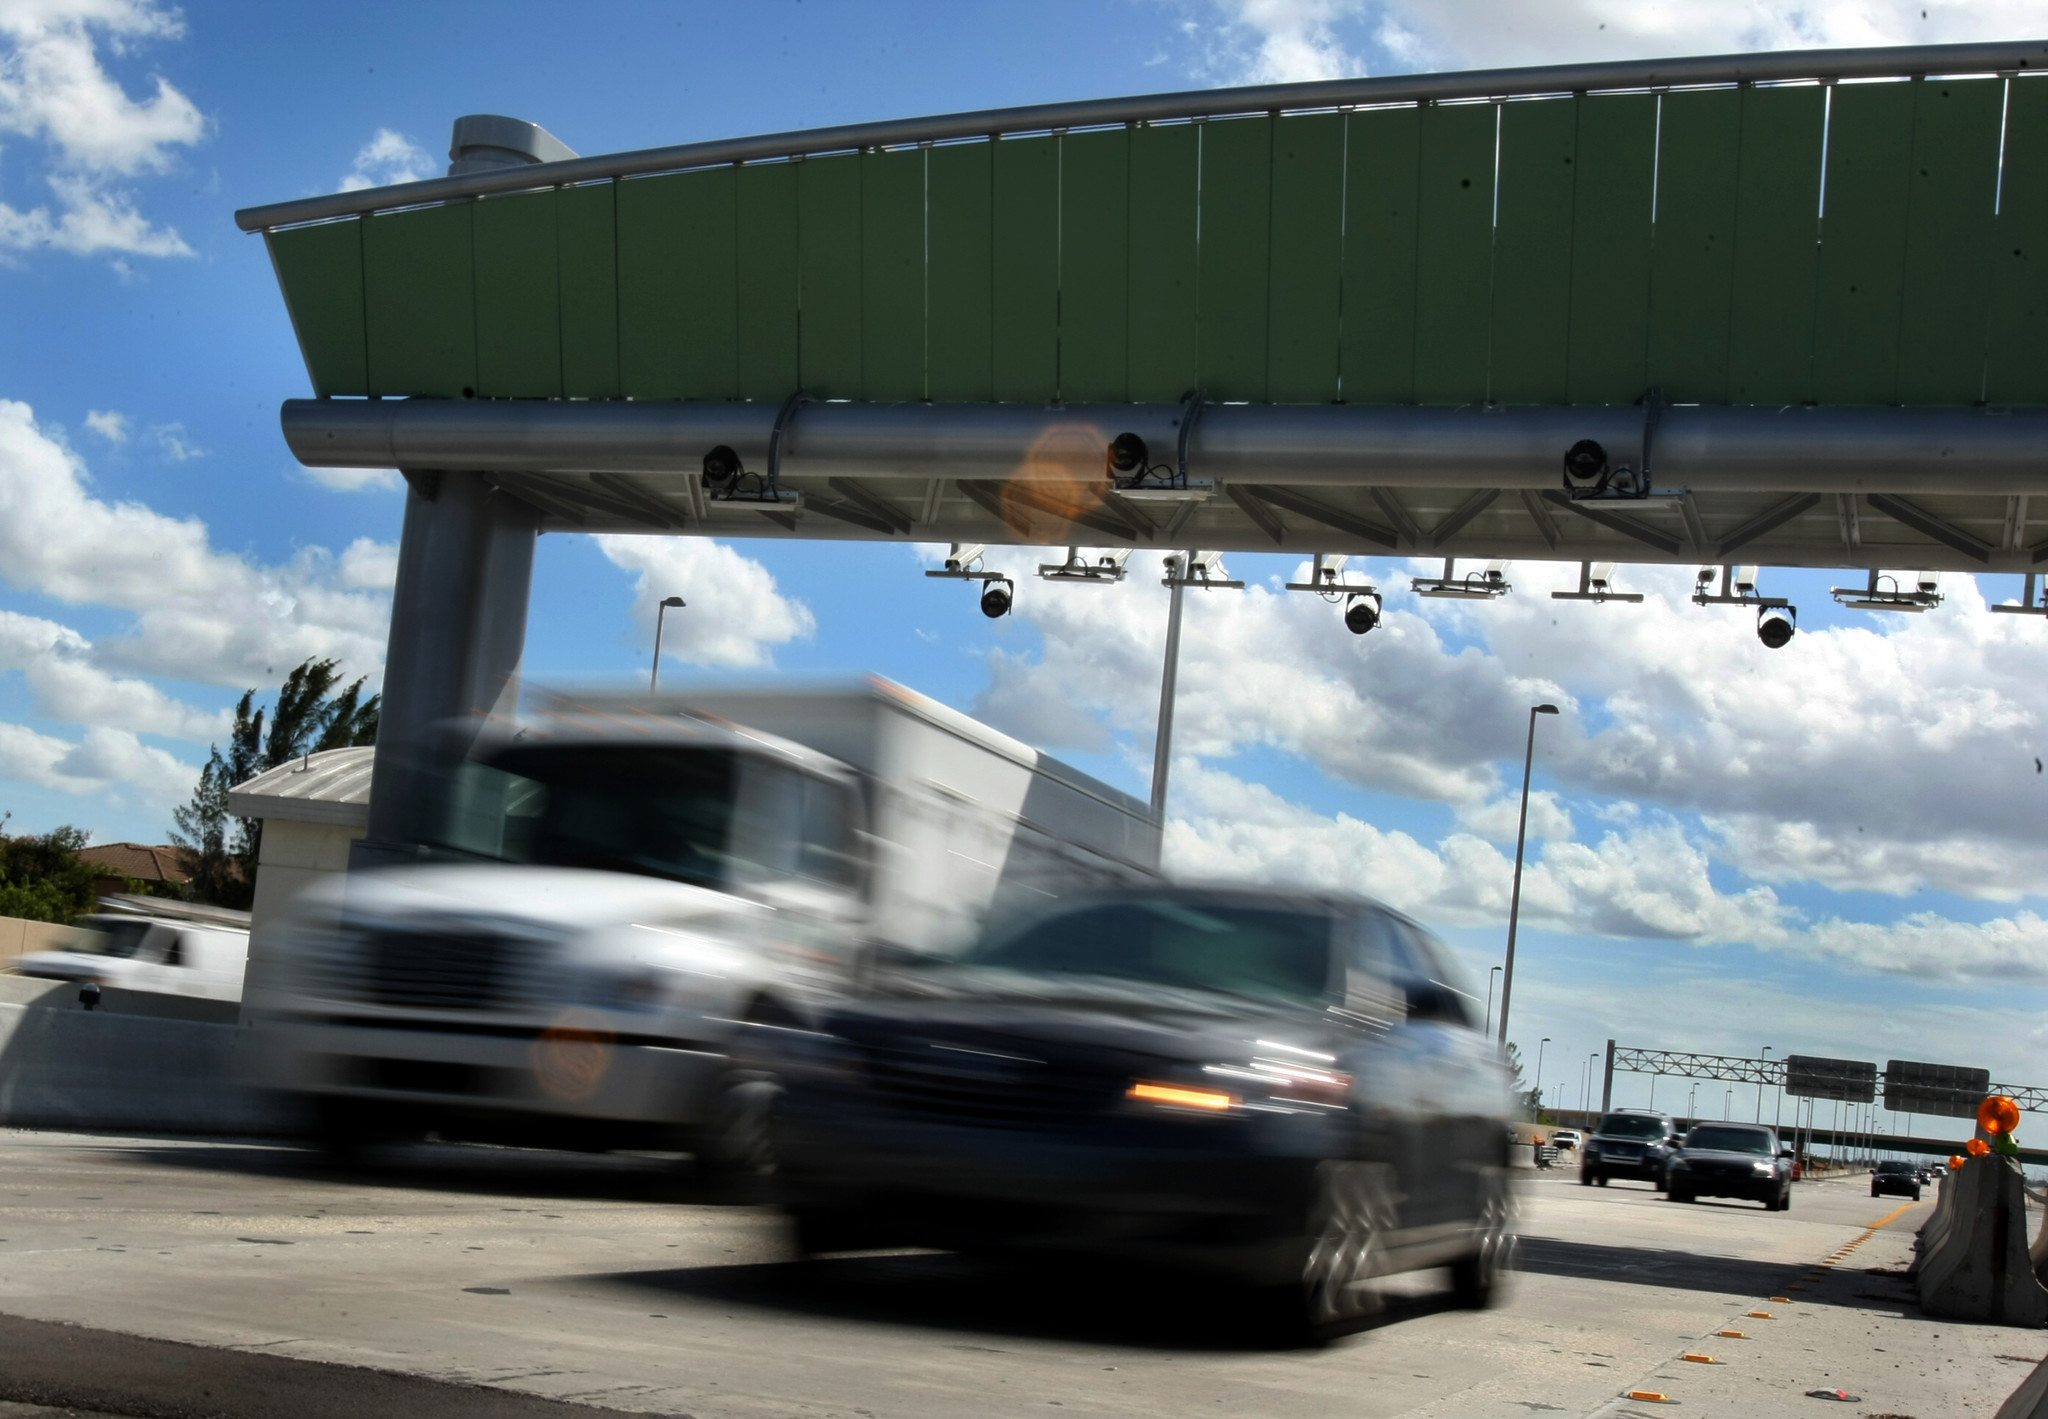 What are some ways to contact SunPass?